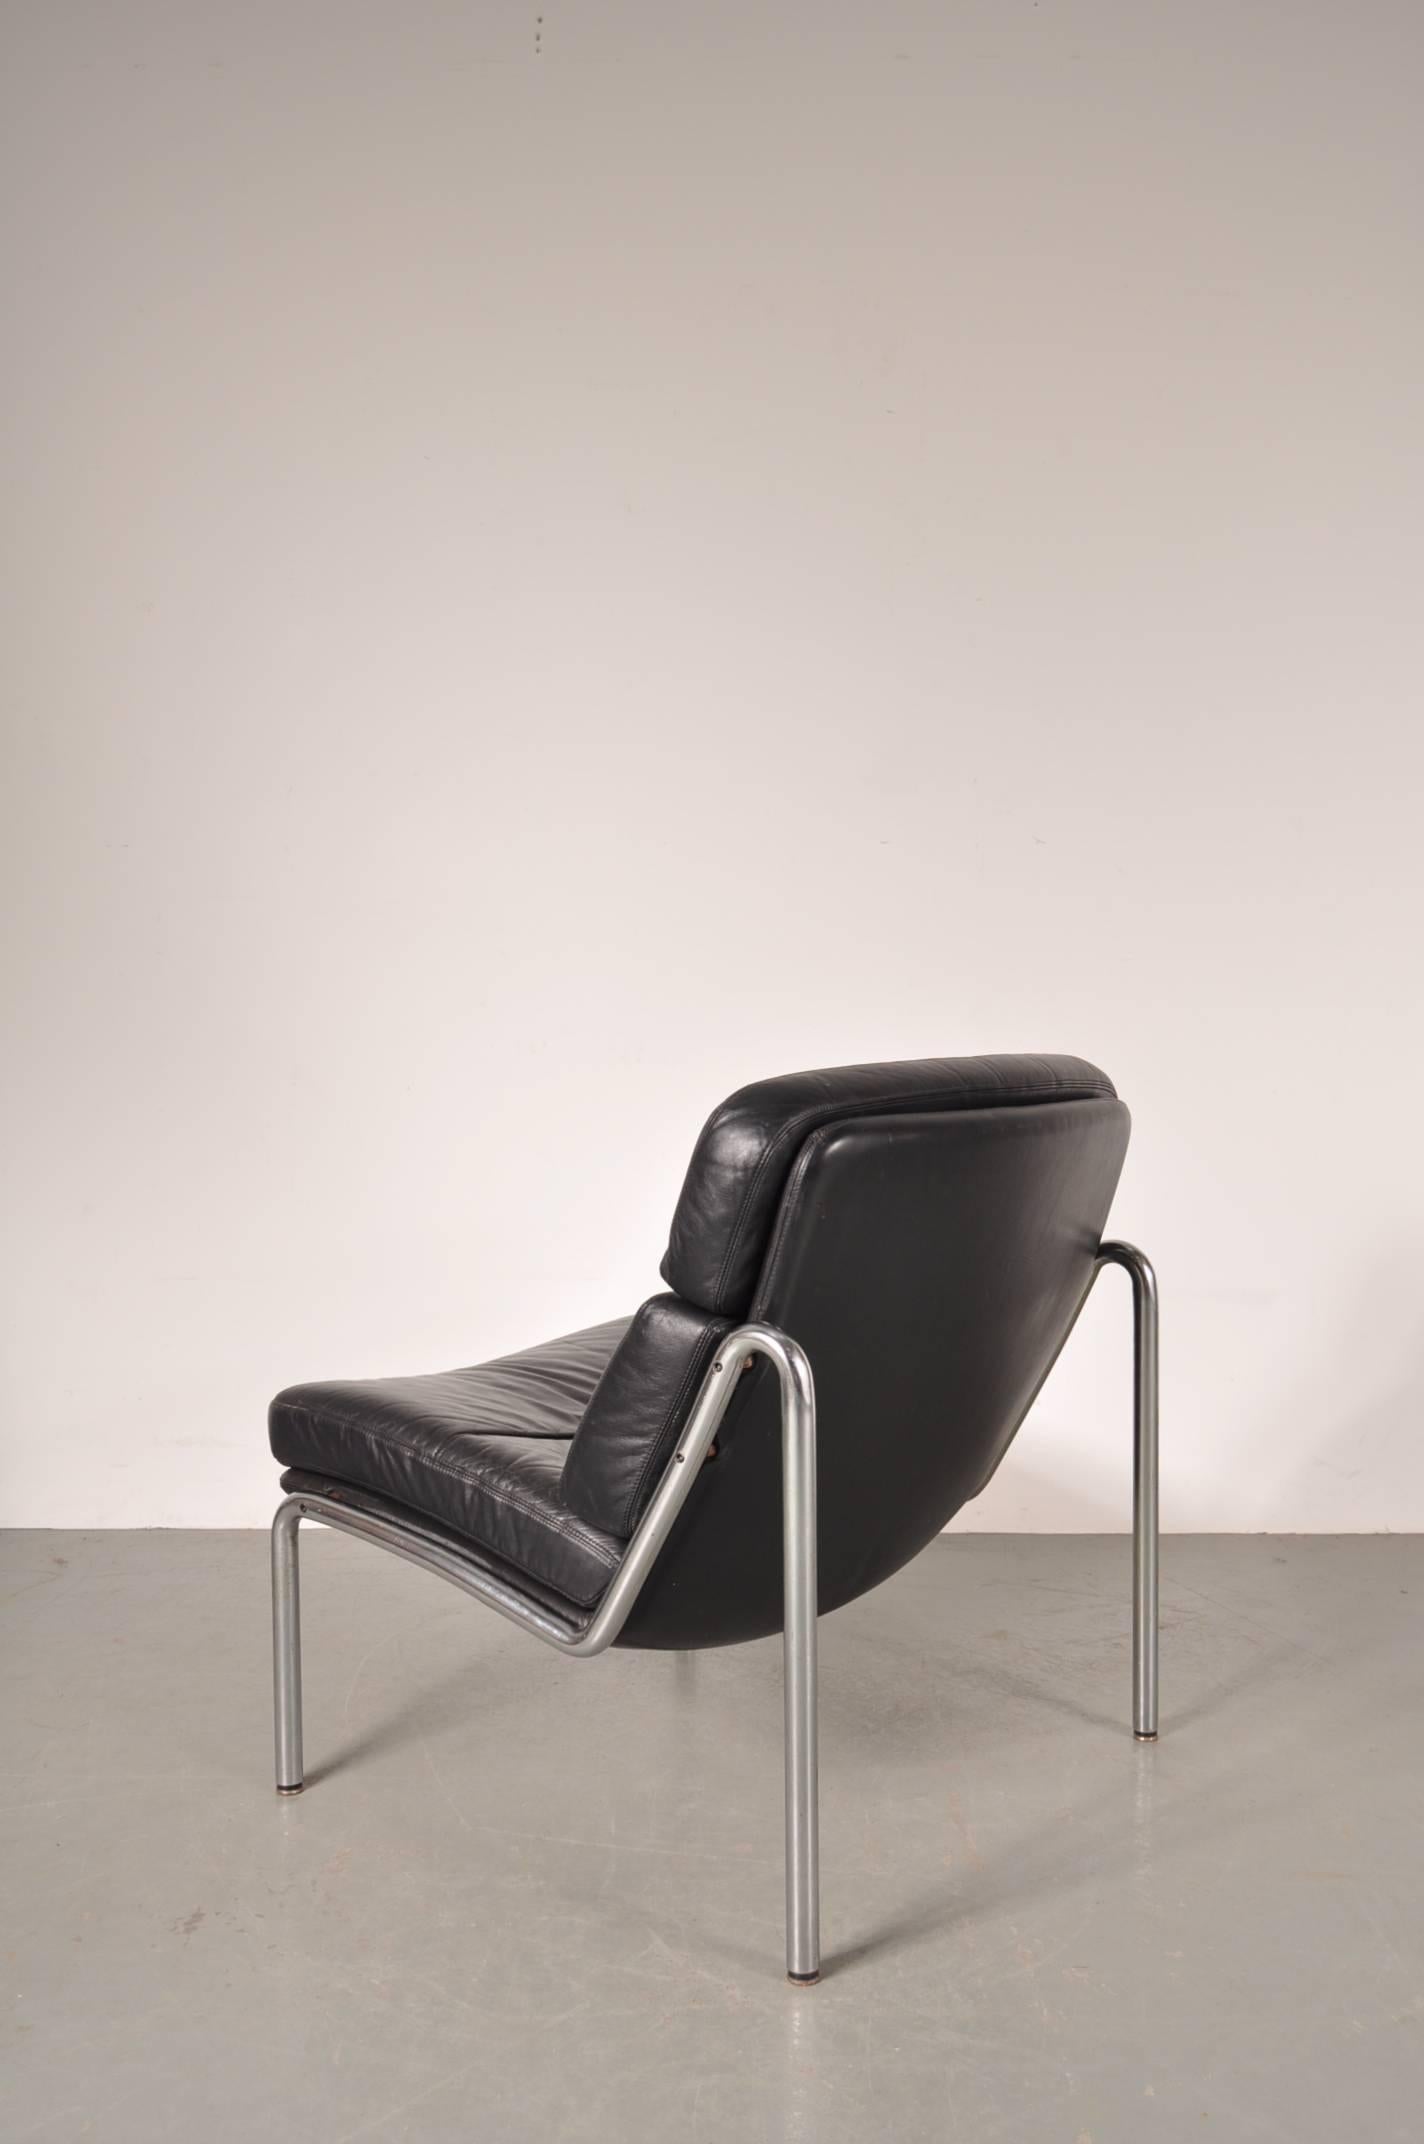 Beautiful easy chair designed by Jorgen Kastholm, manufactured by Kusch & Co. in Germany, circa 1970.

This very comfortable chair is made of a beautiful quality chrome metal tubular frame with black leather upholstery. It truly stands out thanks